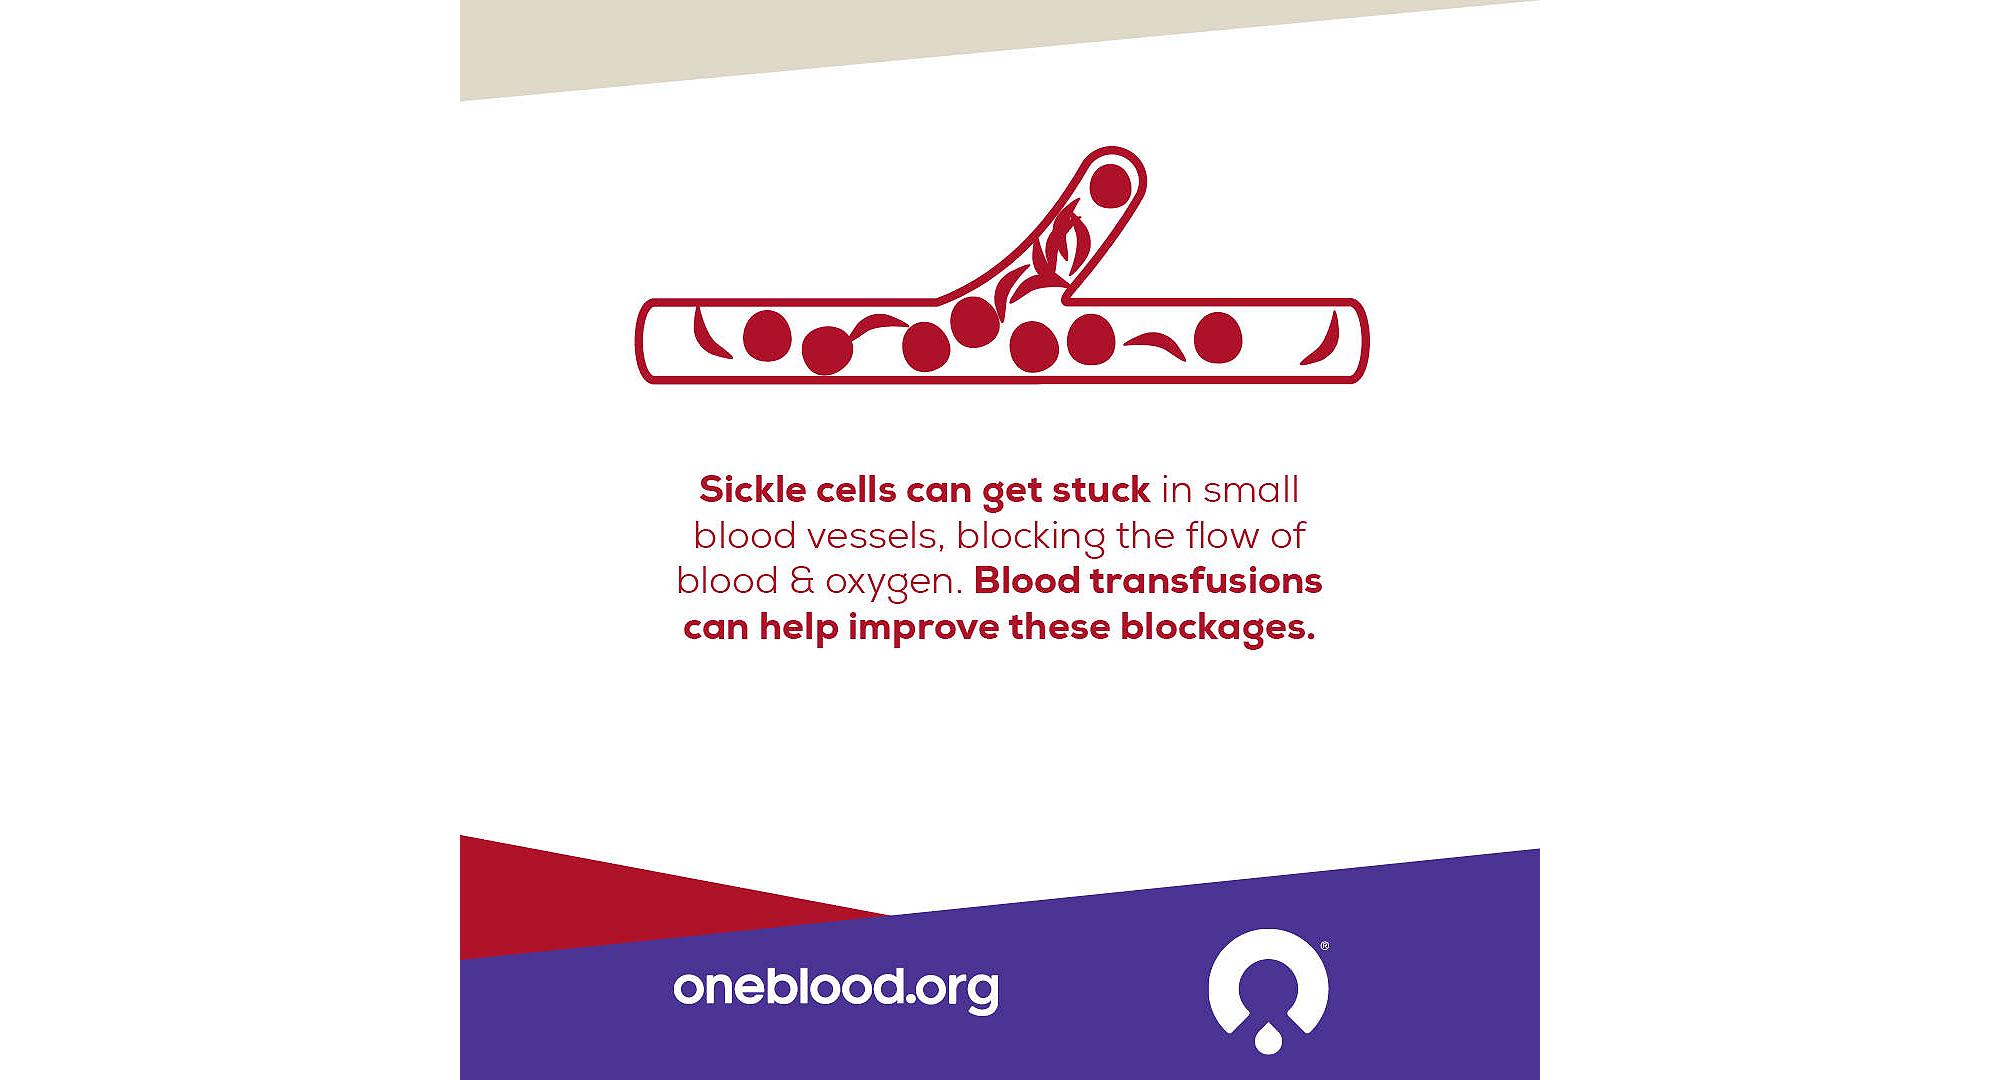 Sickle Cell info graphic reads, “Sickle cells can get stuck in small blood vessels, blocking the flow of blood & oxygen. Blood transfusions can help improve these blockages.” 